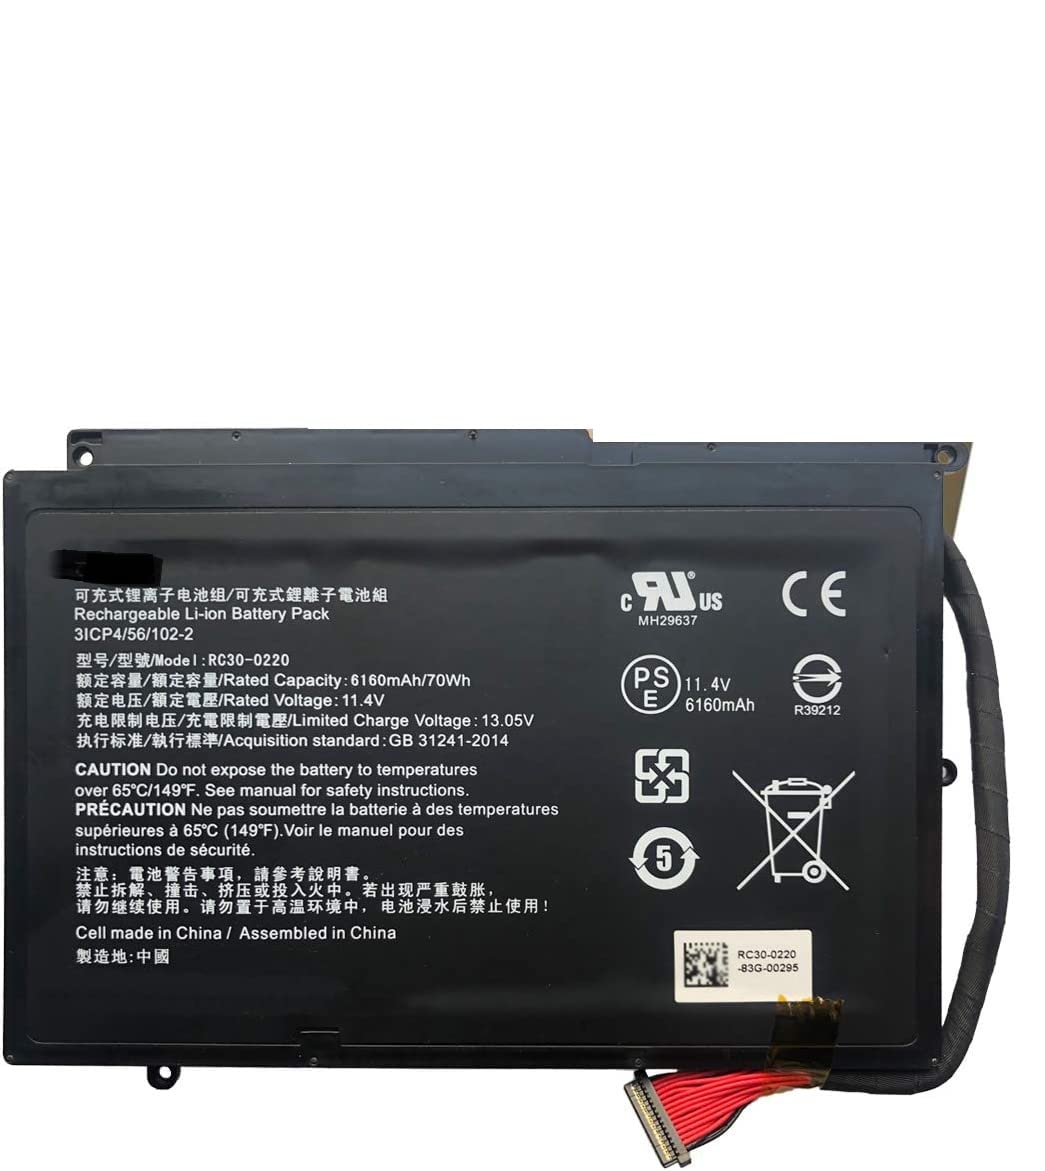 RC30-0220 Laptop Battery Compatible with Razer Blade Pro 17" (2017) i7-7700HK GTX 1060 RZ09-0220 RZ09-02202 Series Notebook 11.4V 70Wh 6160mAh